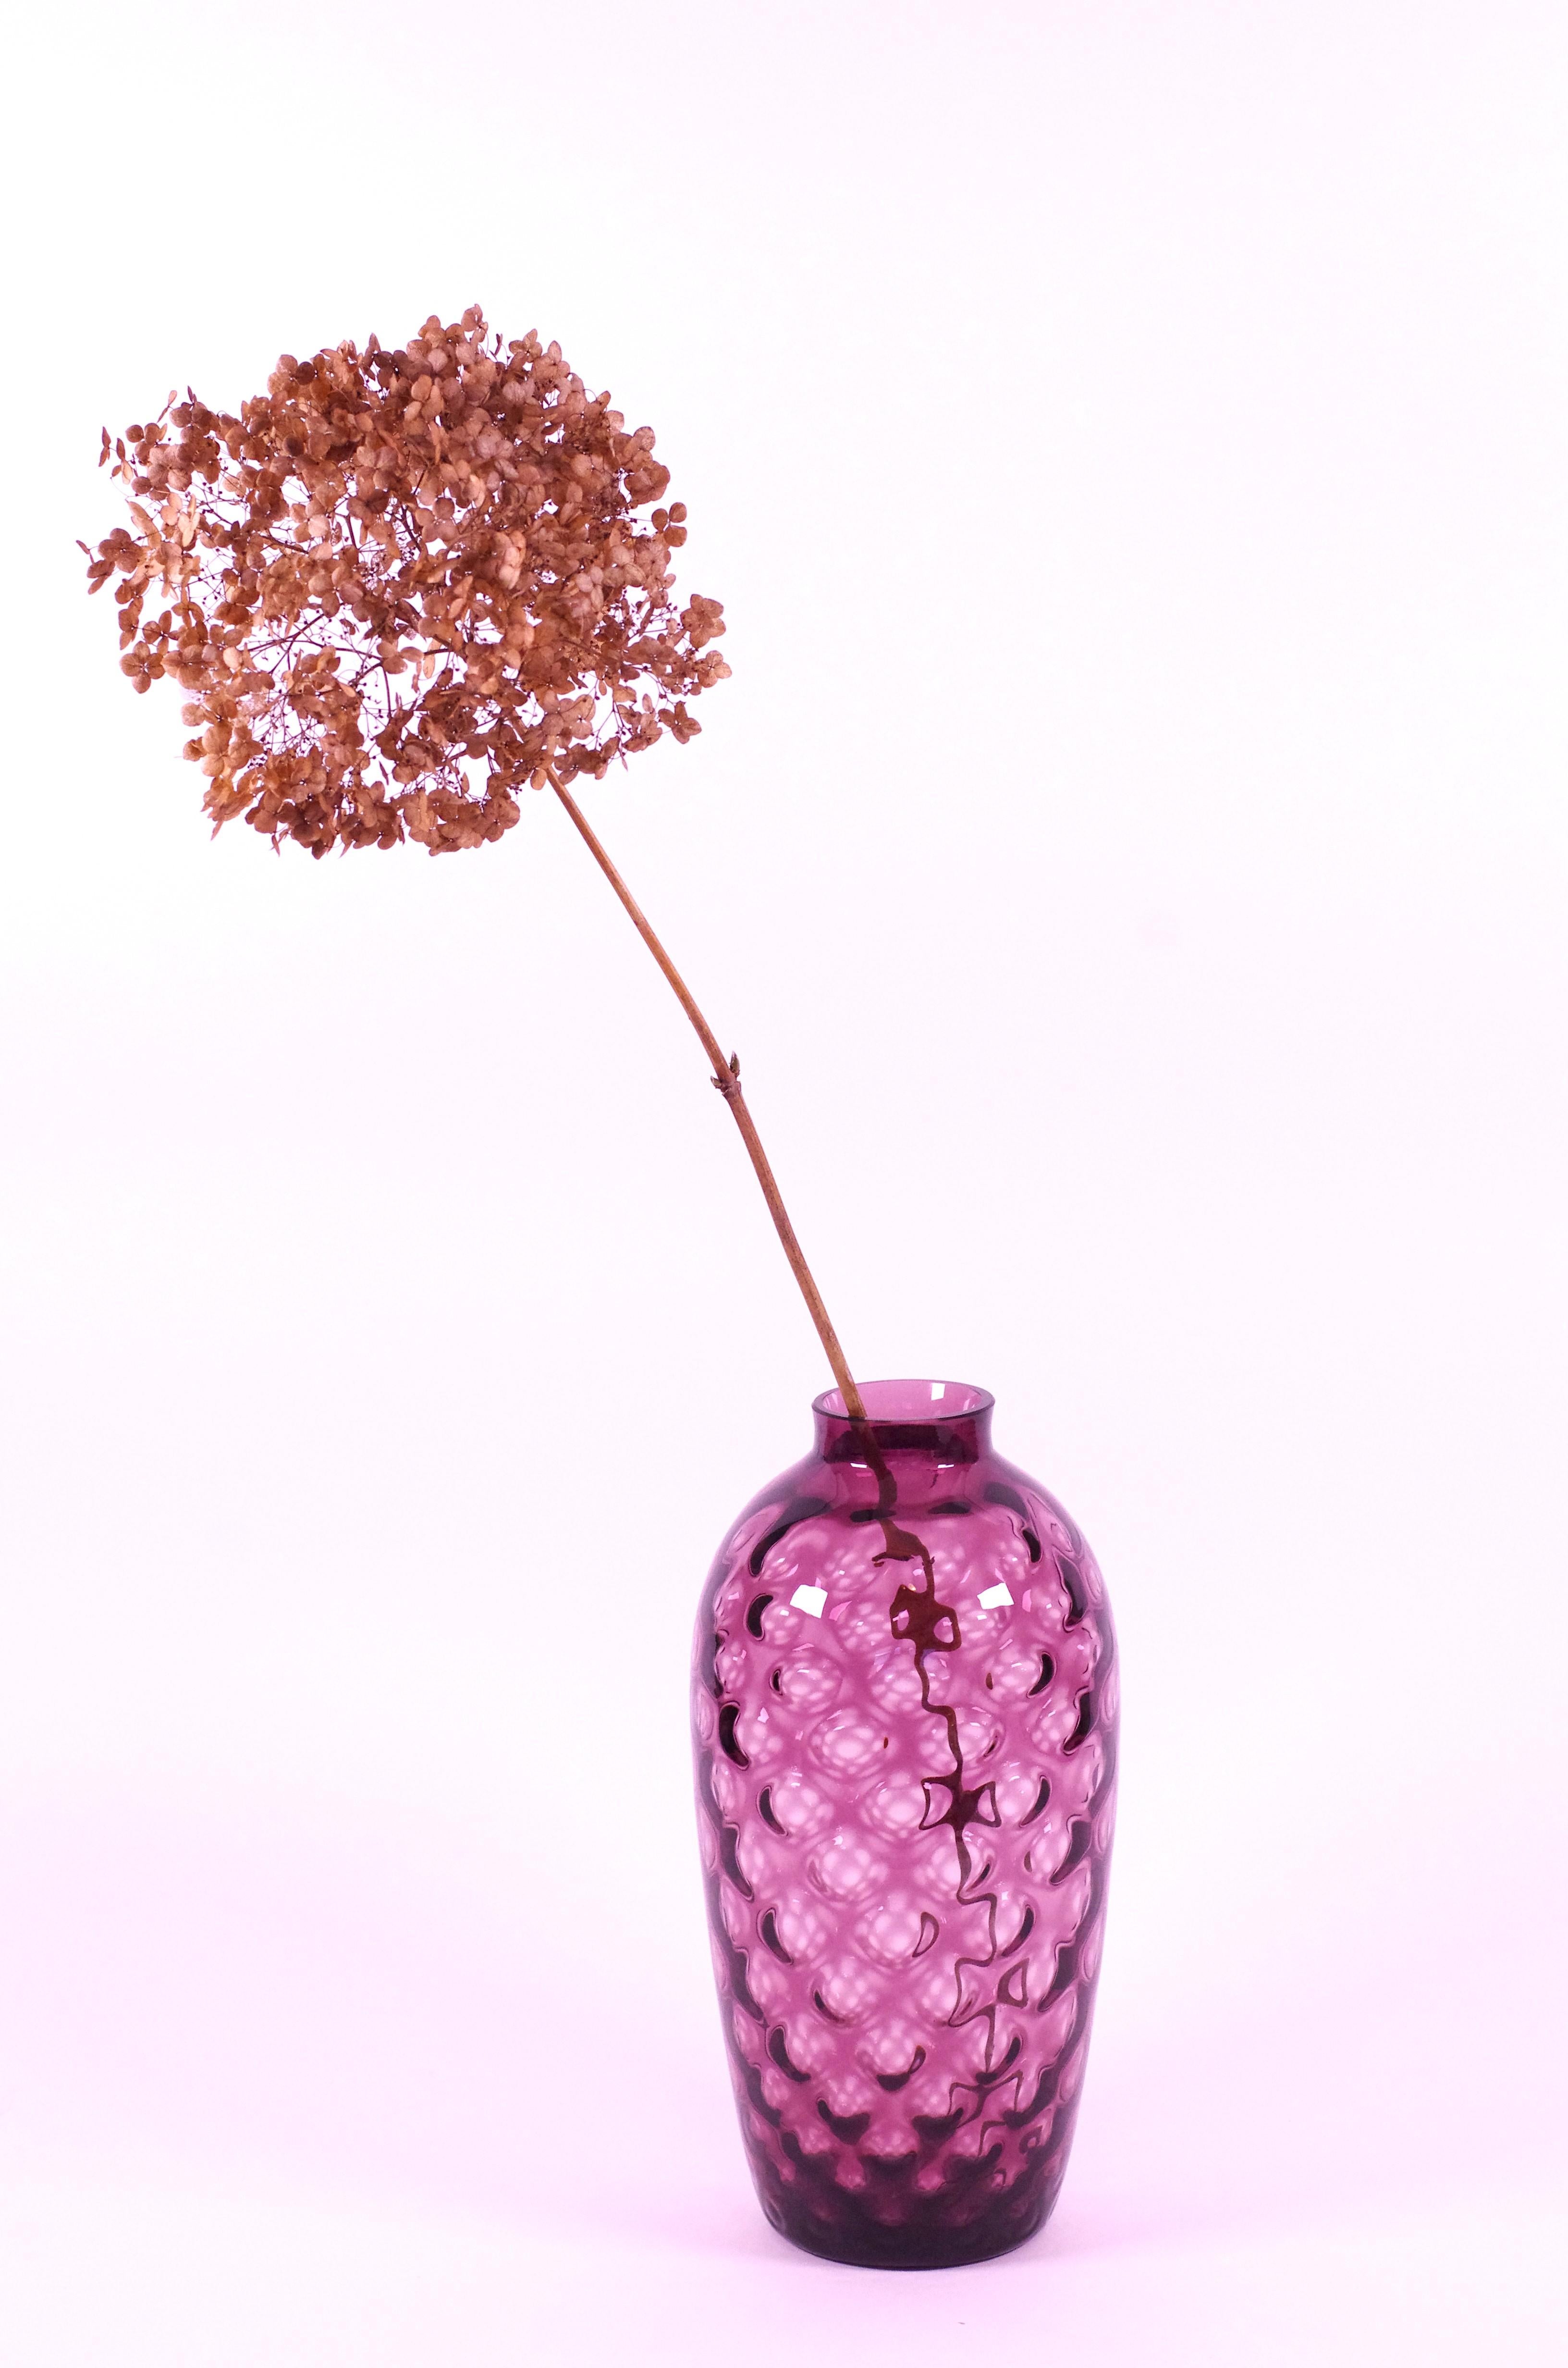 Product description:
This vase, by Borske Sklo, combines a nice summerish color with an elegant form. The vase suits a single (larger) flower but could hold a colourful bouquet as well. The color of the vase lies between pink and purple, more light